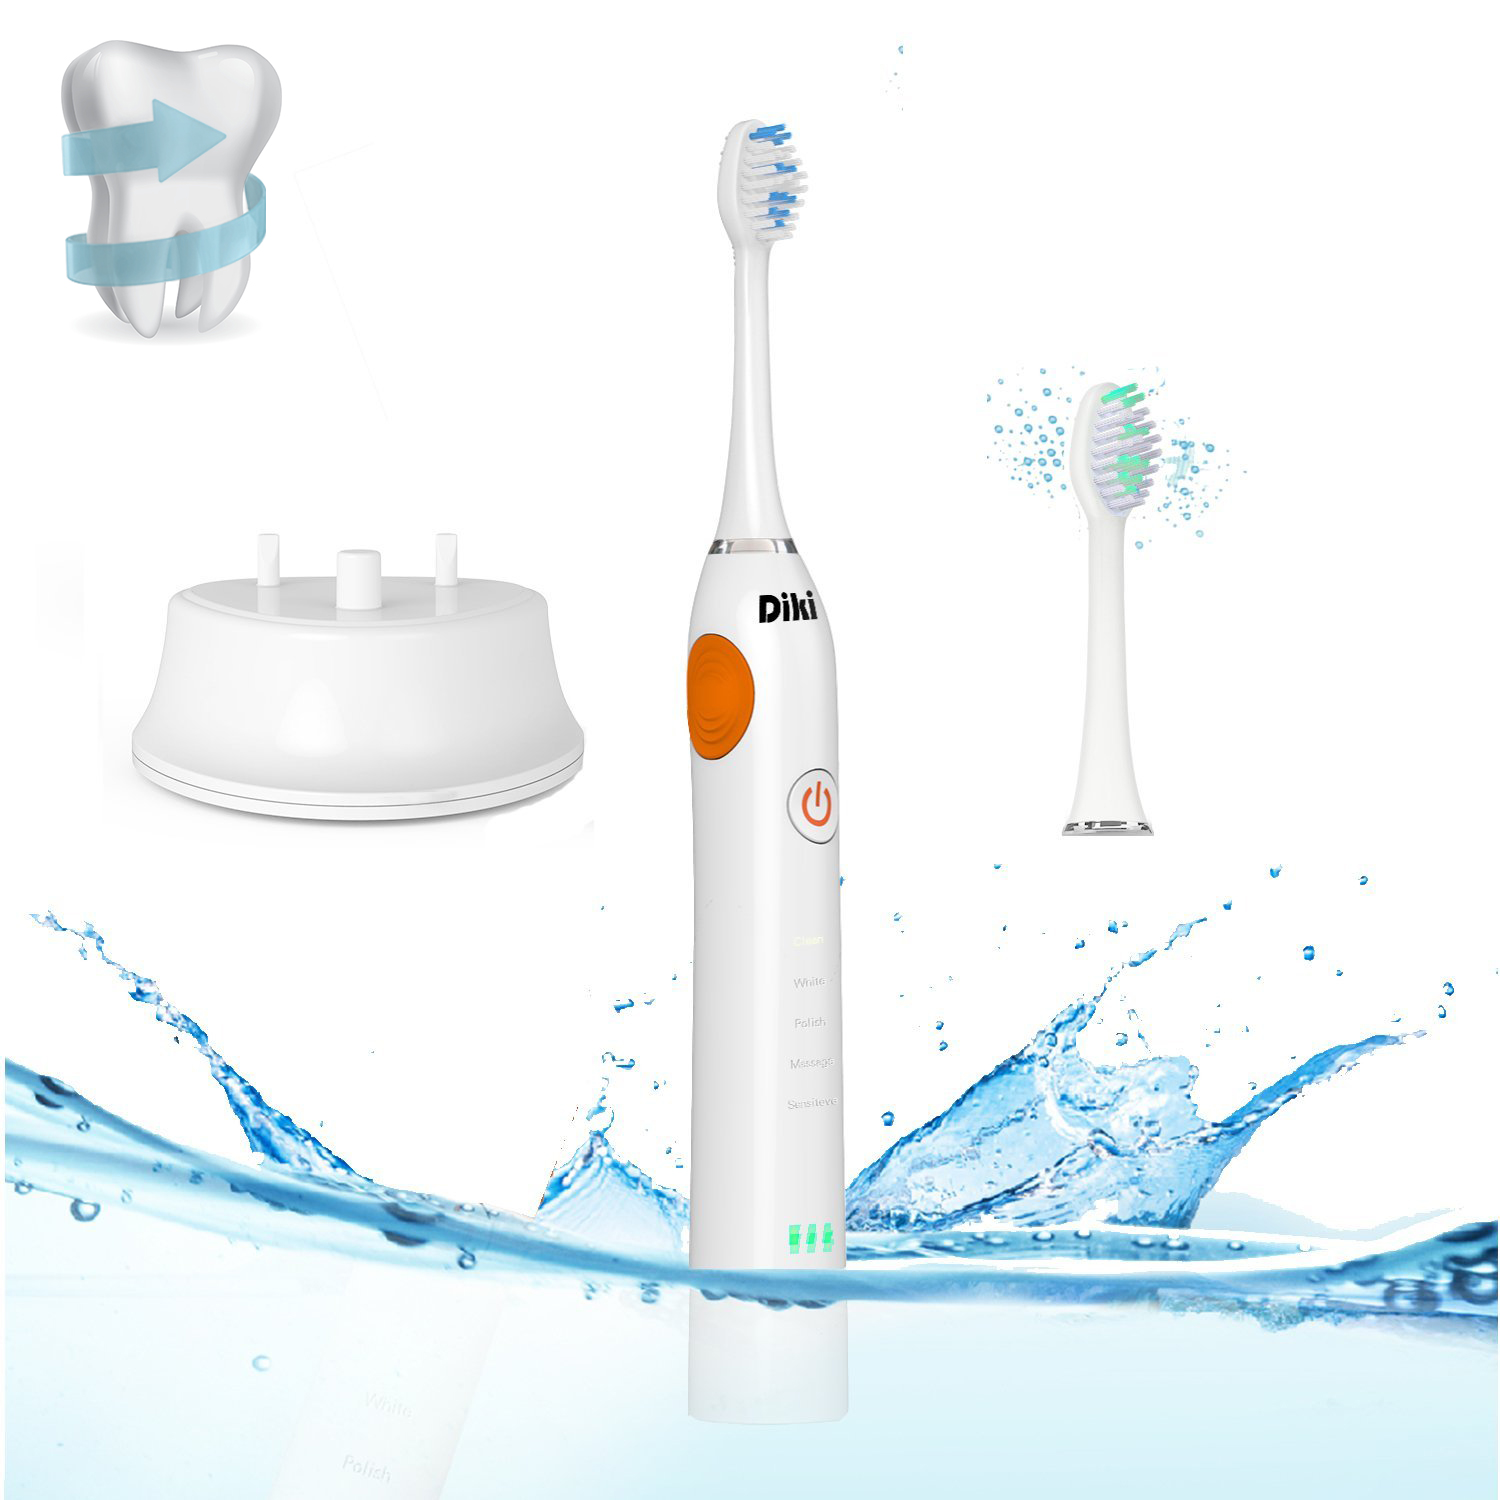 Electric Toothbrush DIKI 2 Minutes Timer 5 Modes Rechargeable Adaptive Clean Brush Head Remove Plaque Clean Gums Travel IPX 7 Waterproof Toothbrush